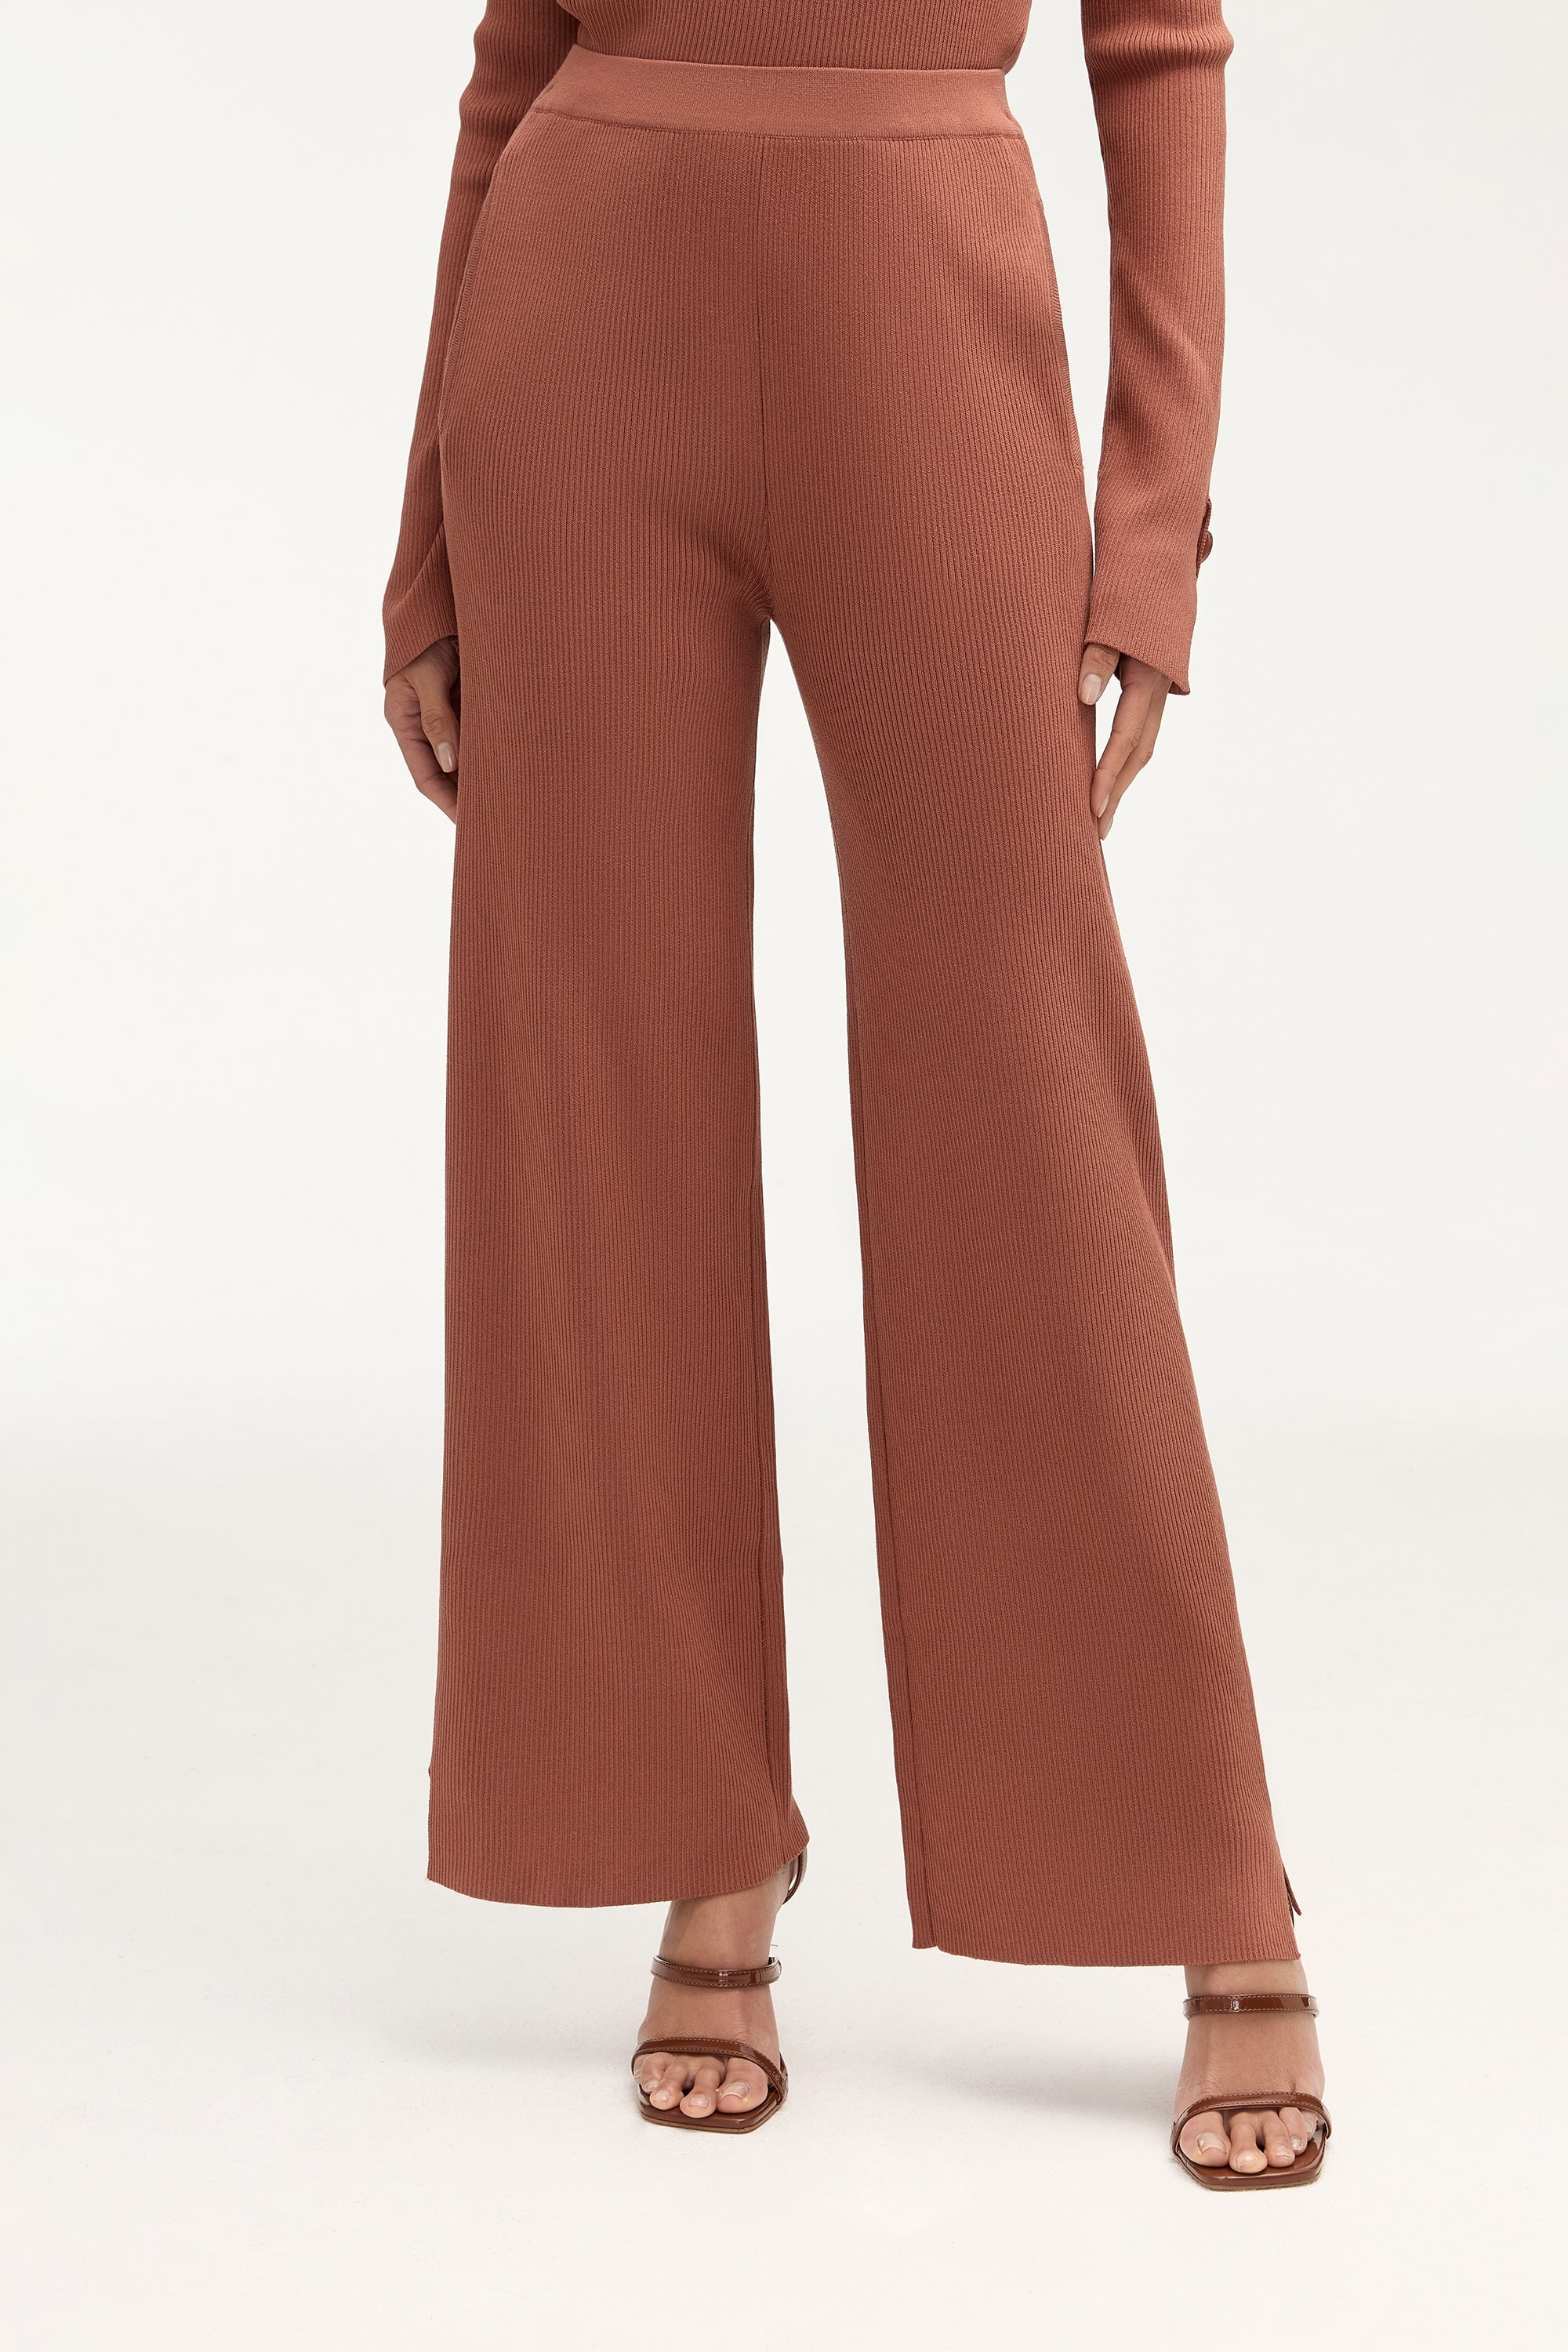 Remy Ribbed Knit Wide Leg Pants Clothing Veiled 